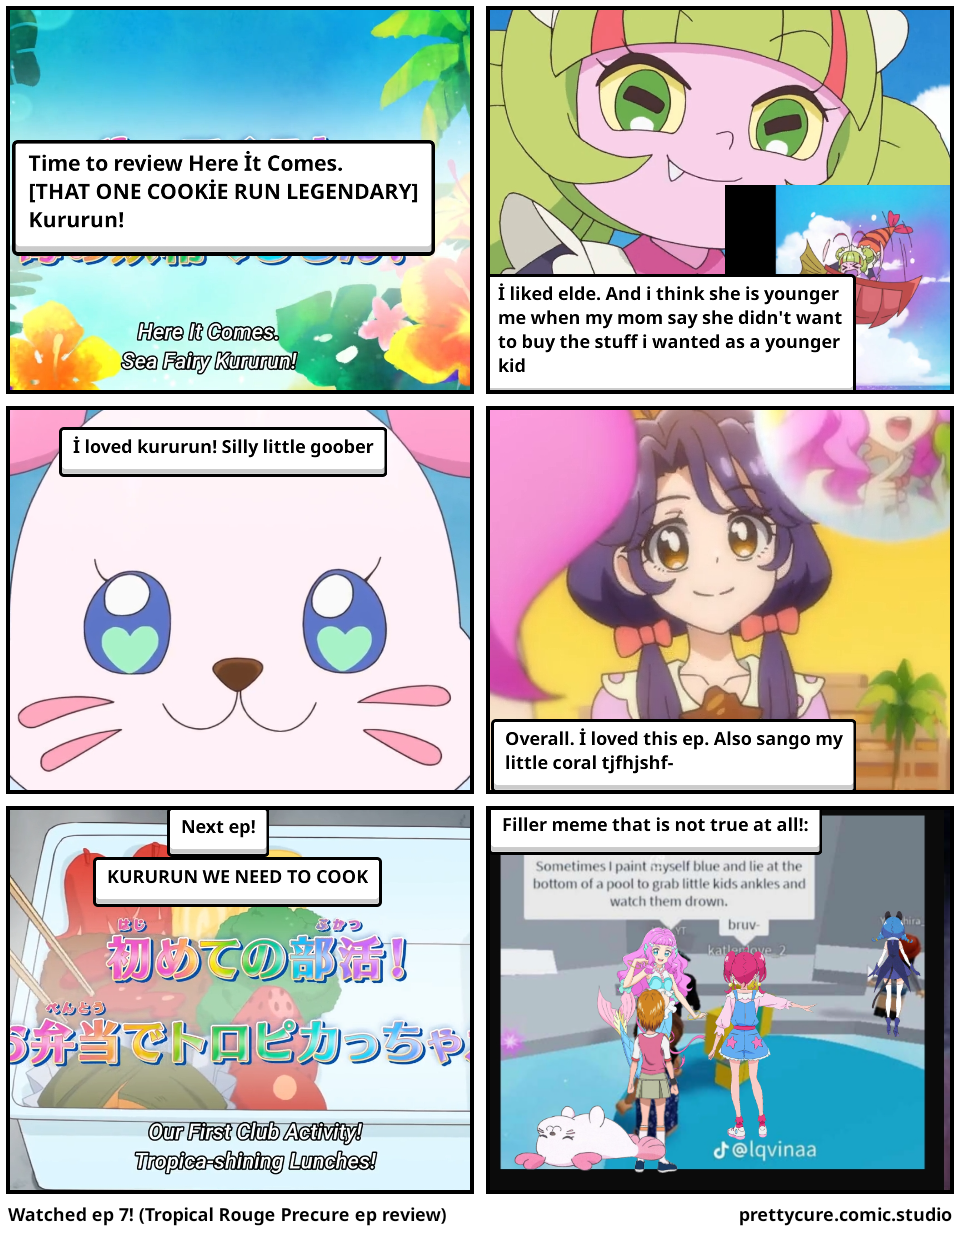 Watched ep 7! (Tropical Rouge Precure ep review)